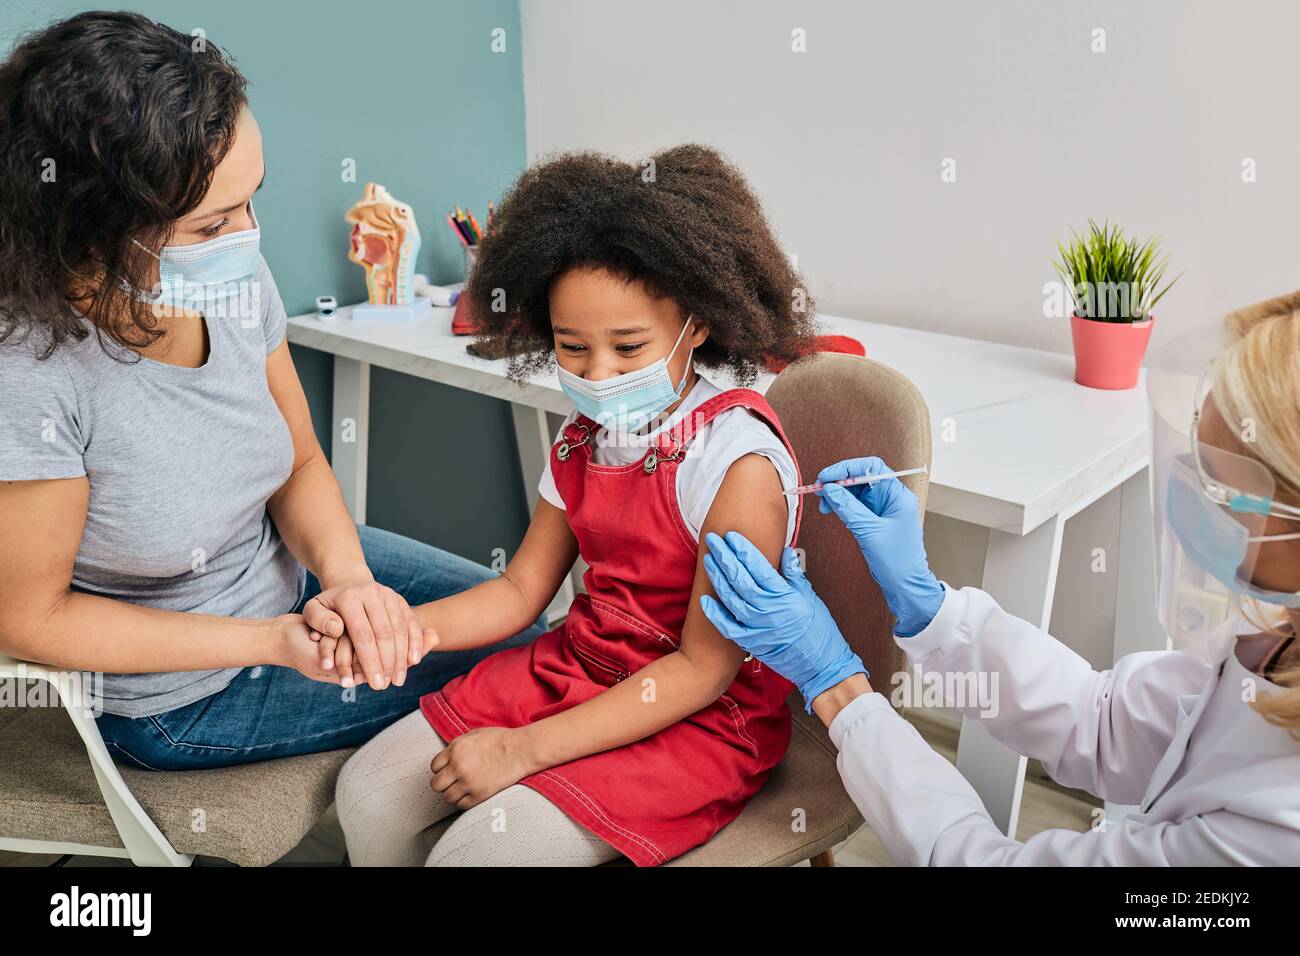 Routine vaccinations for a child. African American girl and her mother wearing medical masks while vaccinated by a general practitioner Stock Photo